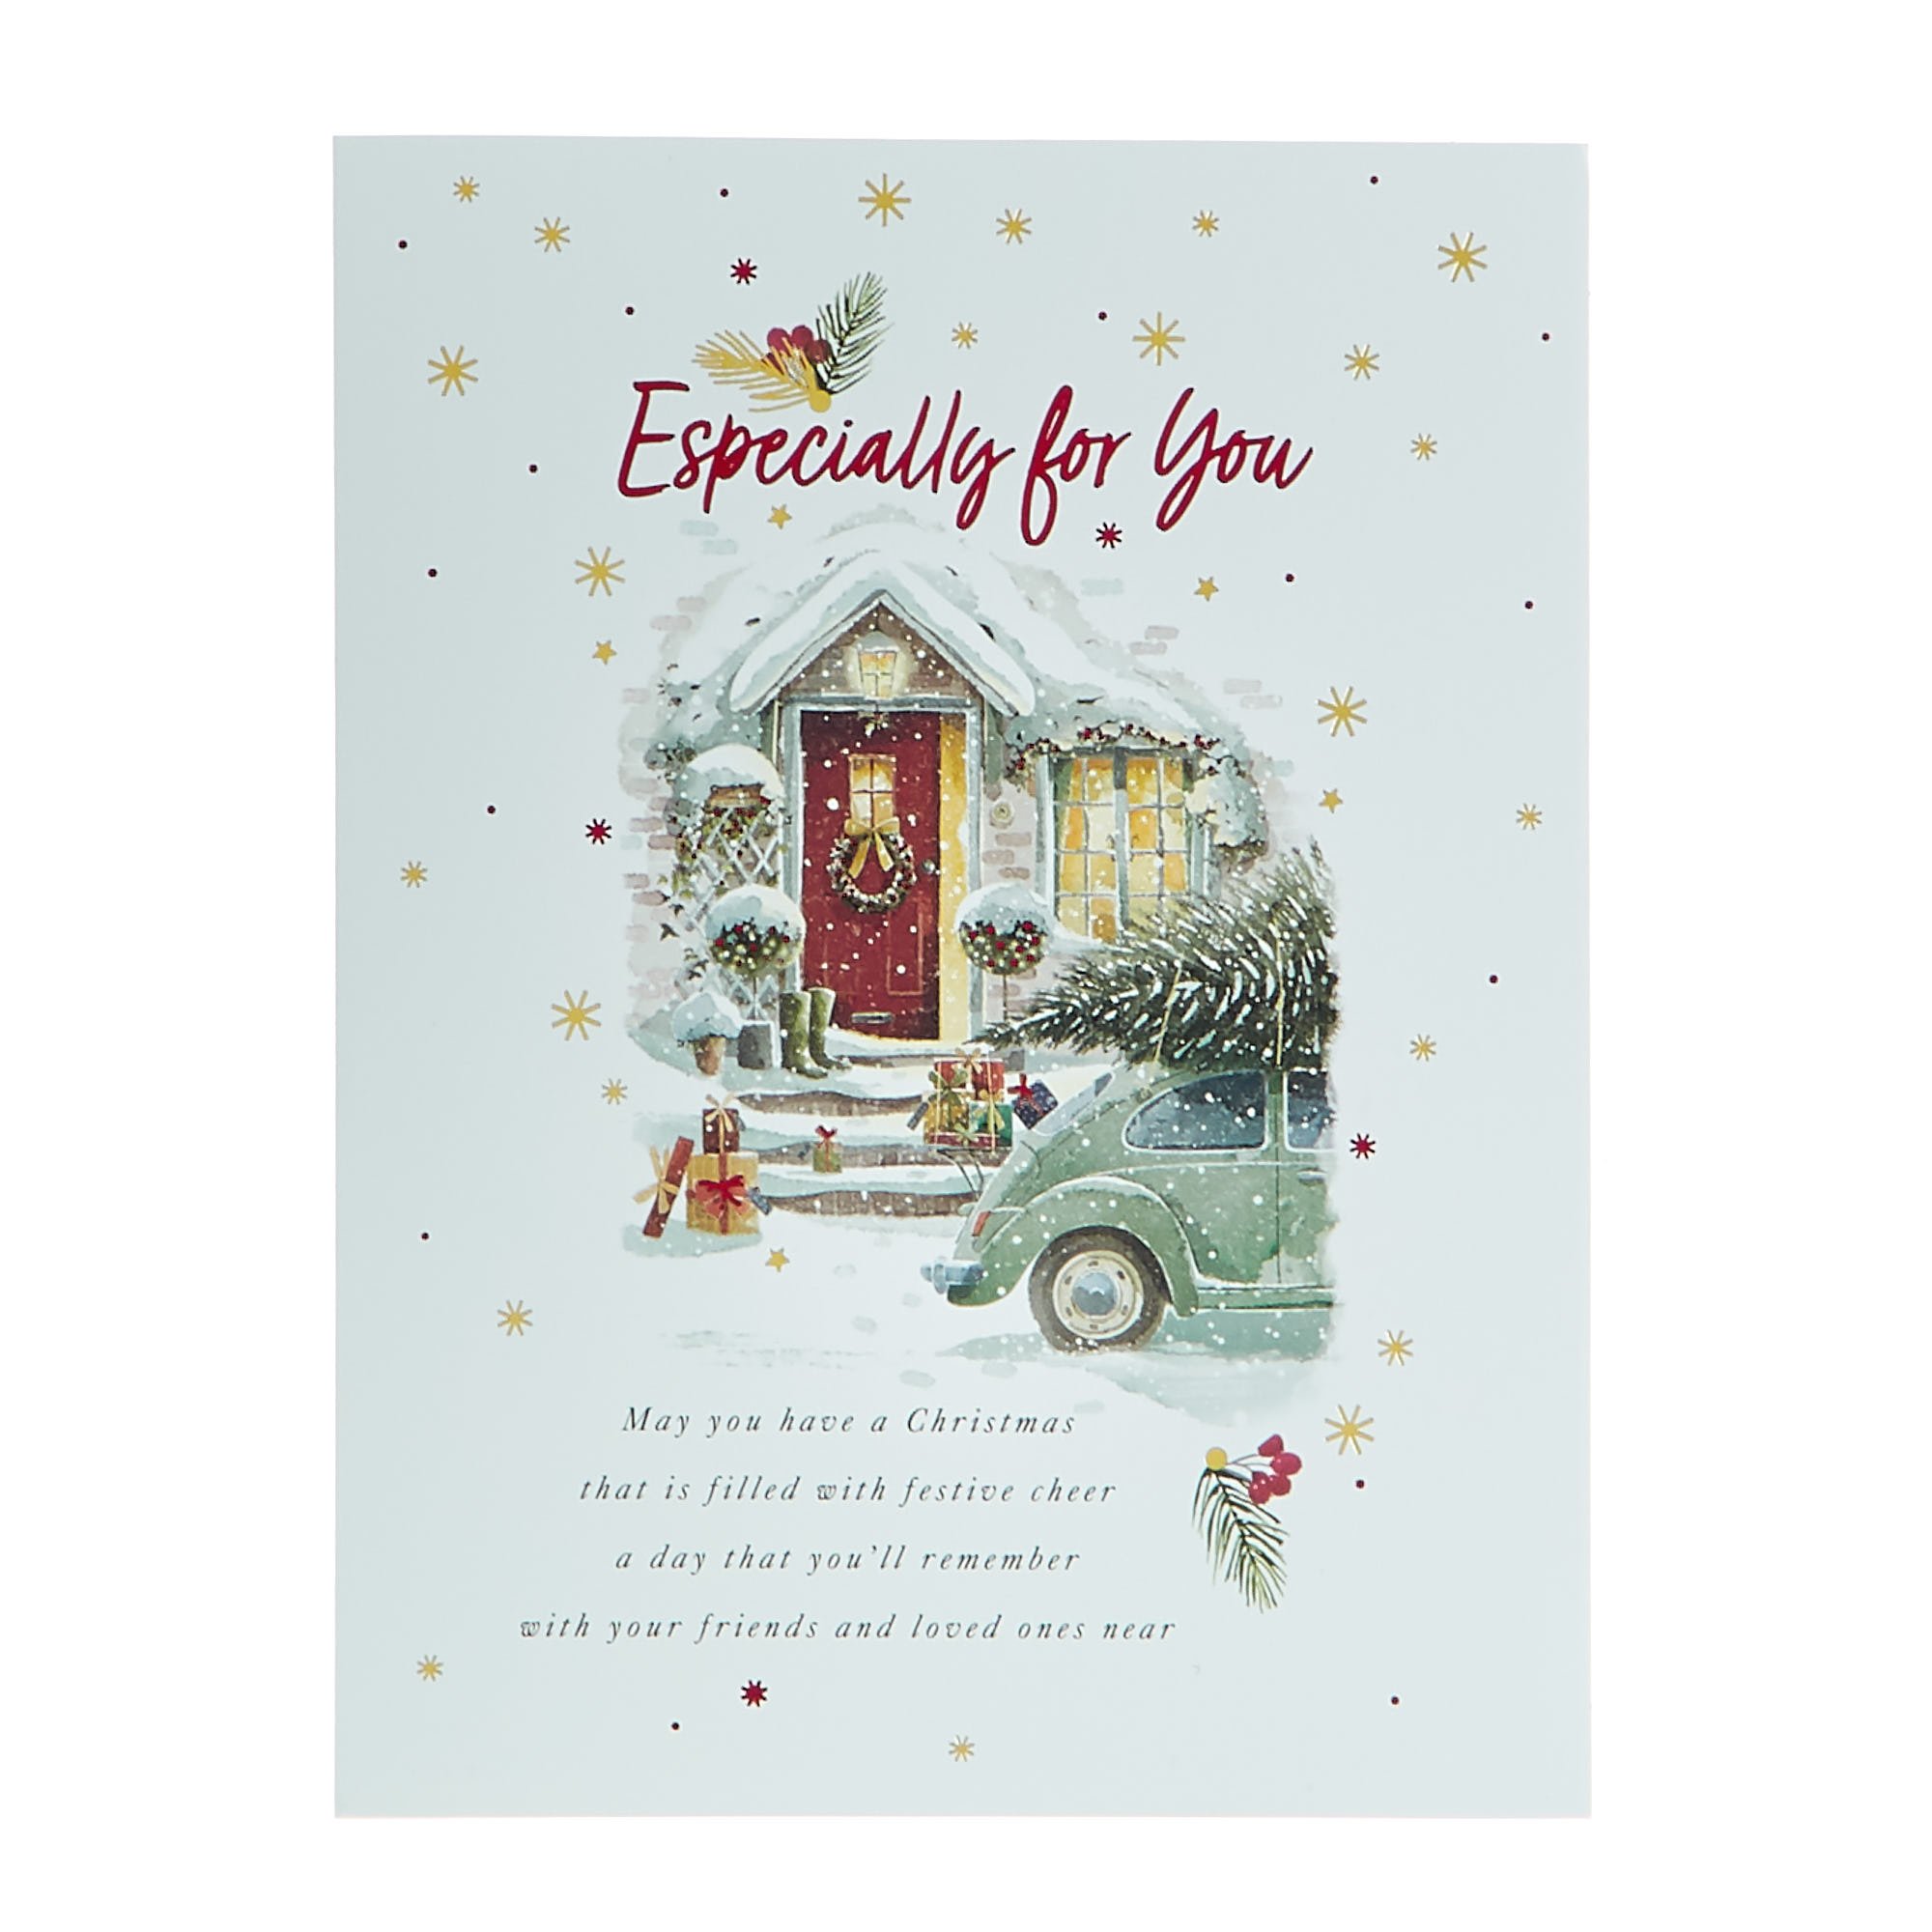 10 Deluxe Charity Boxed Christmas Cards - Fireplace & Door (2 Designs)